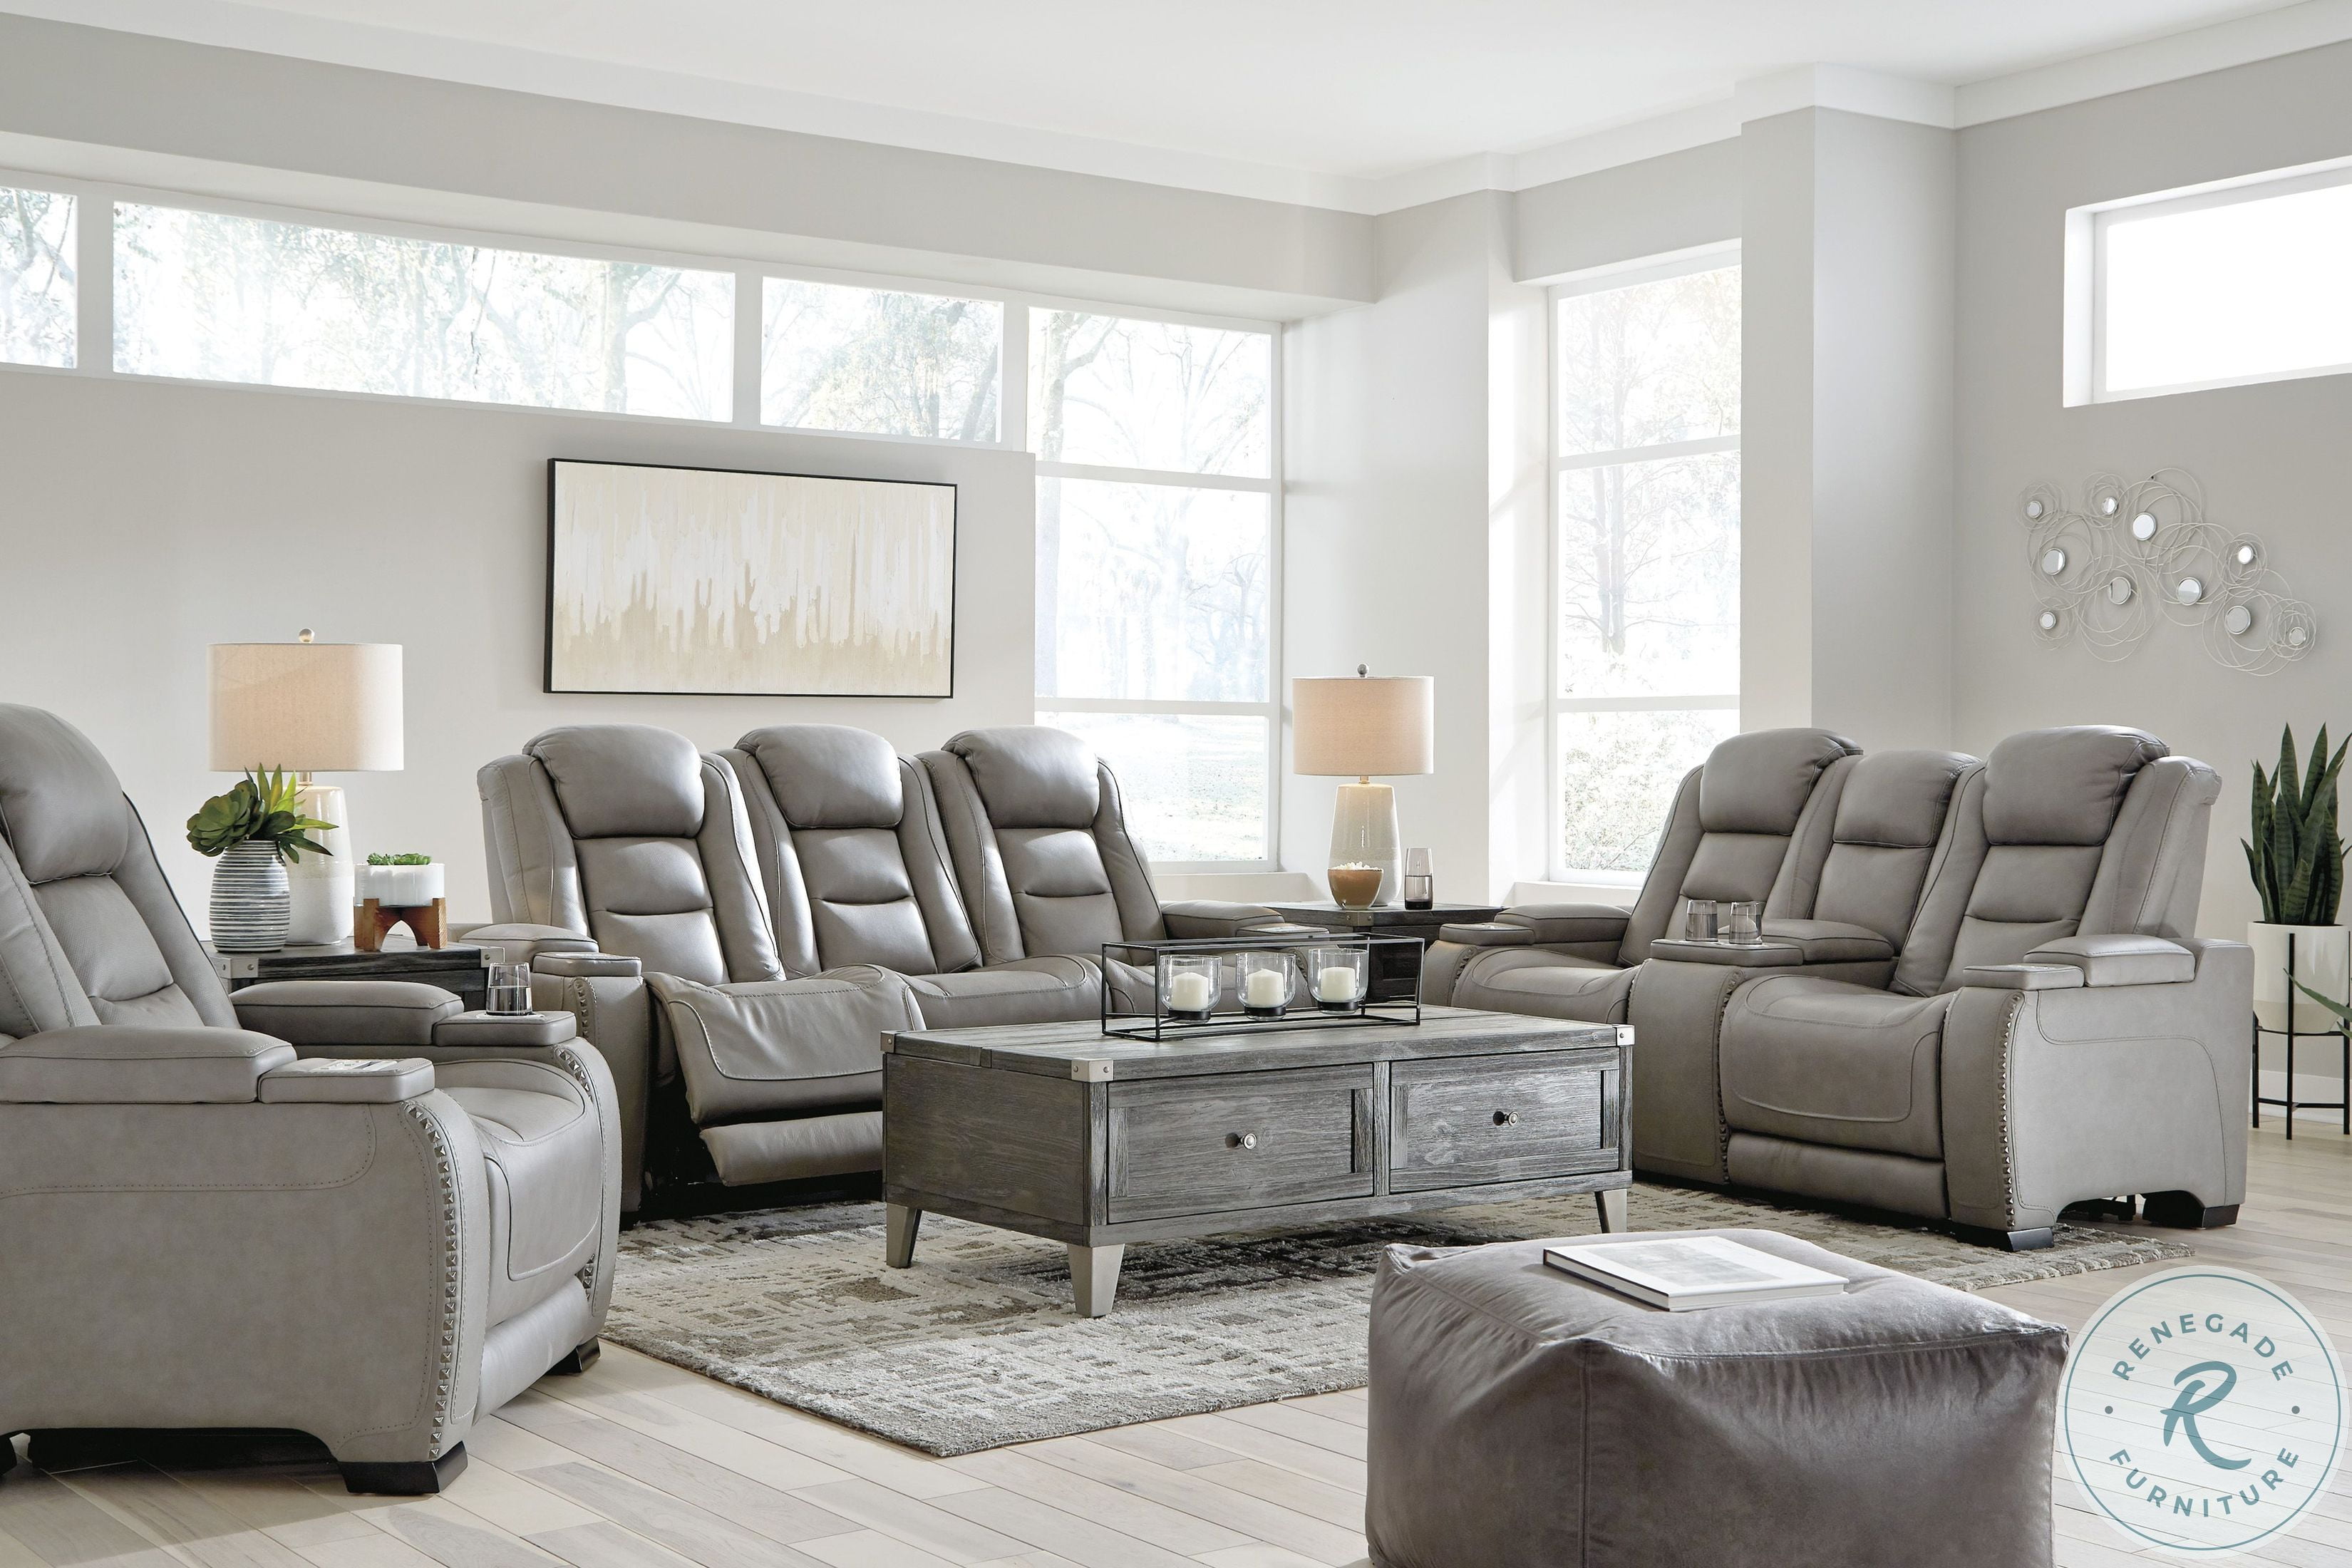 The Man Den Gray Leather Power Reclining Sofa with Adjustable Headrest